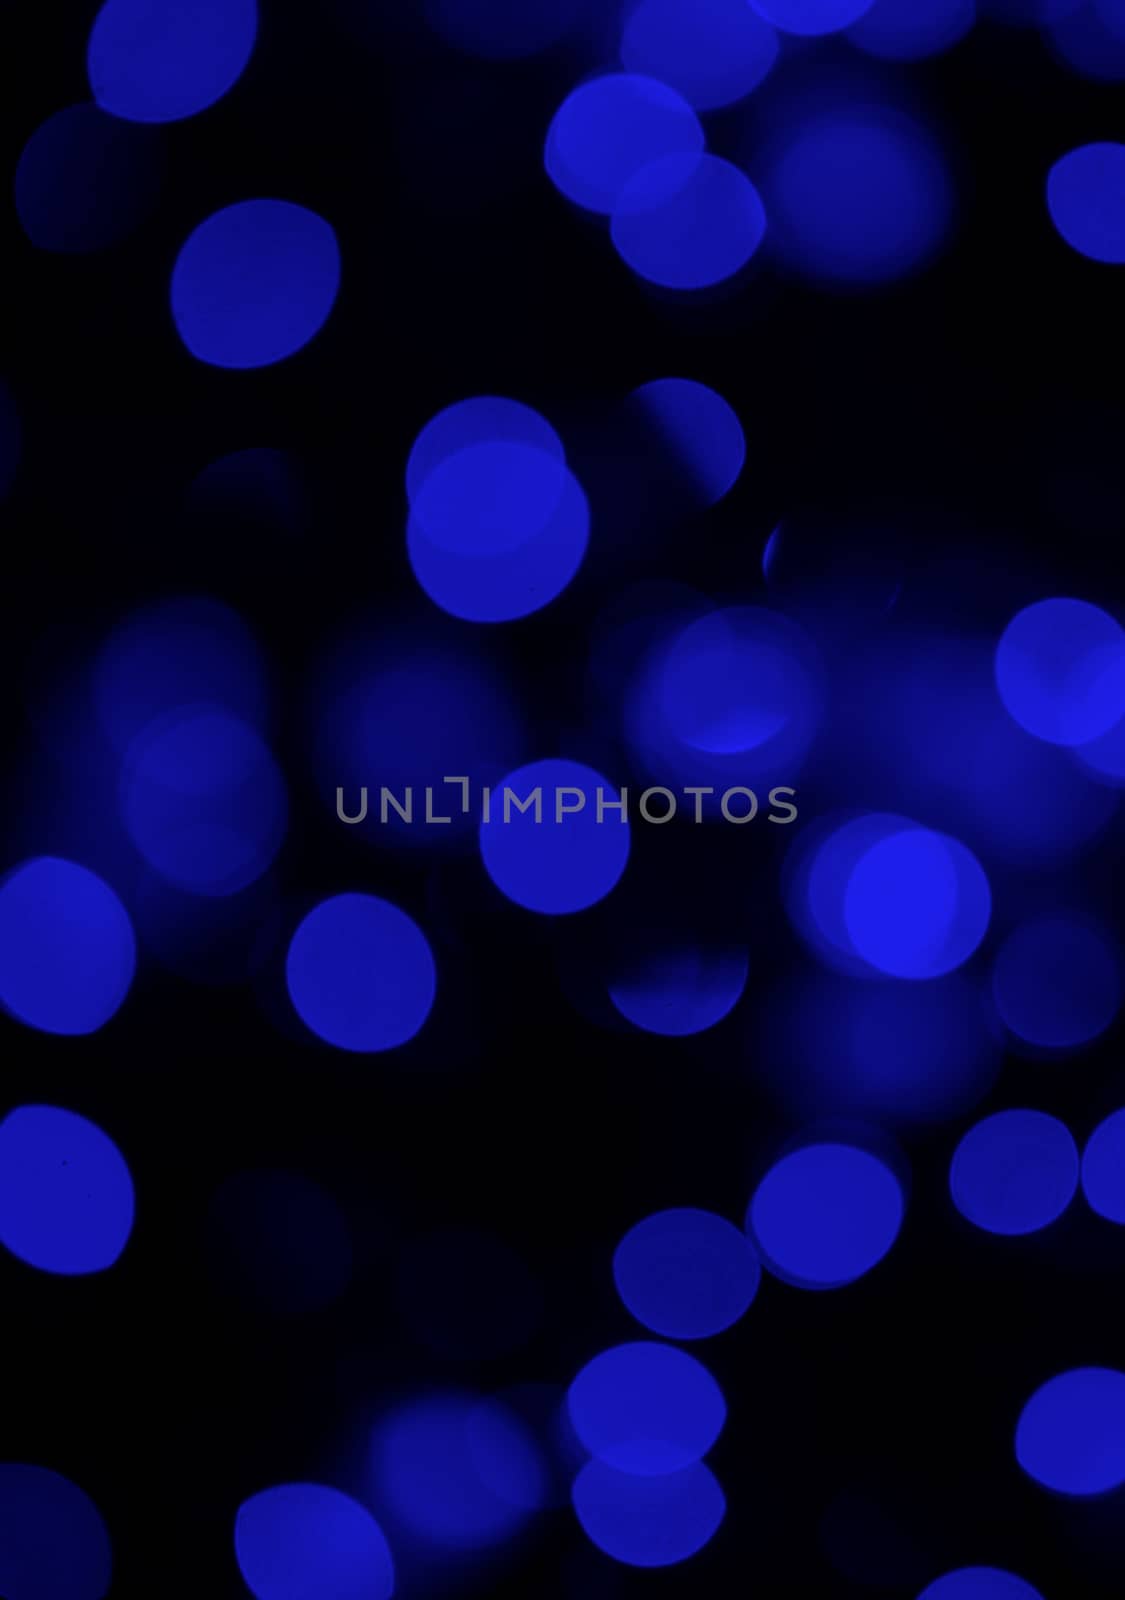 blue and black abstract lighting effect for a background